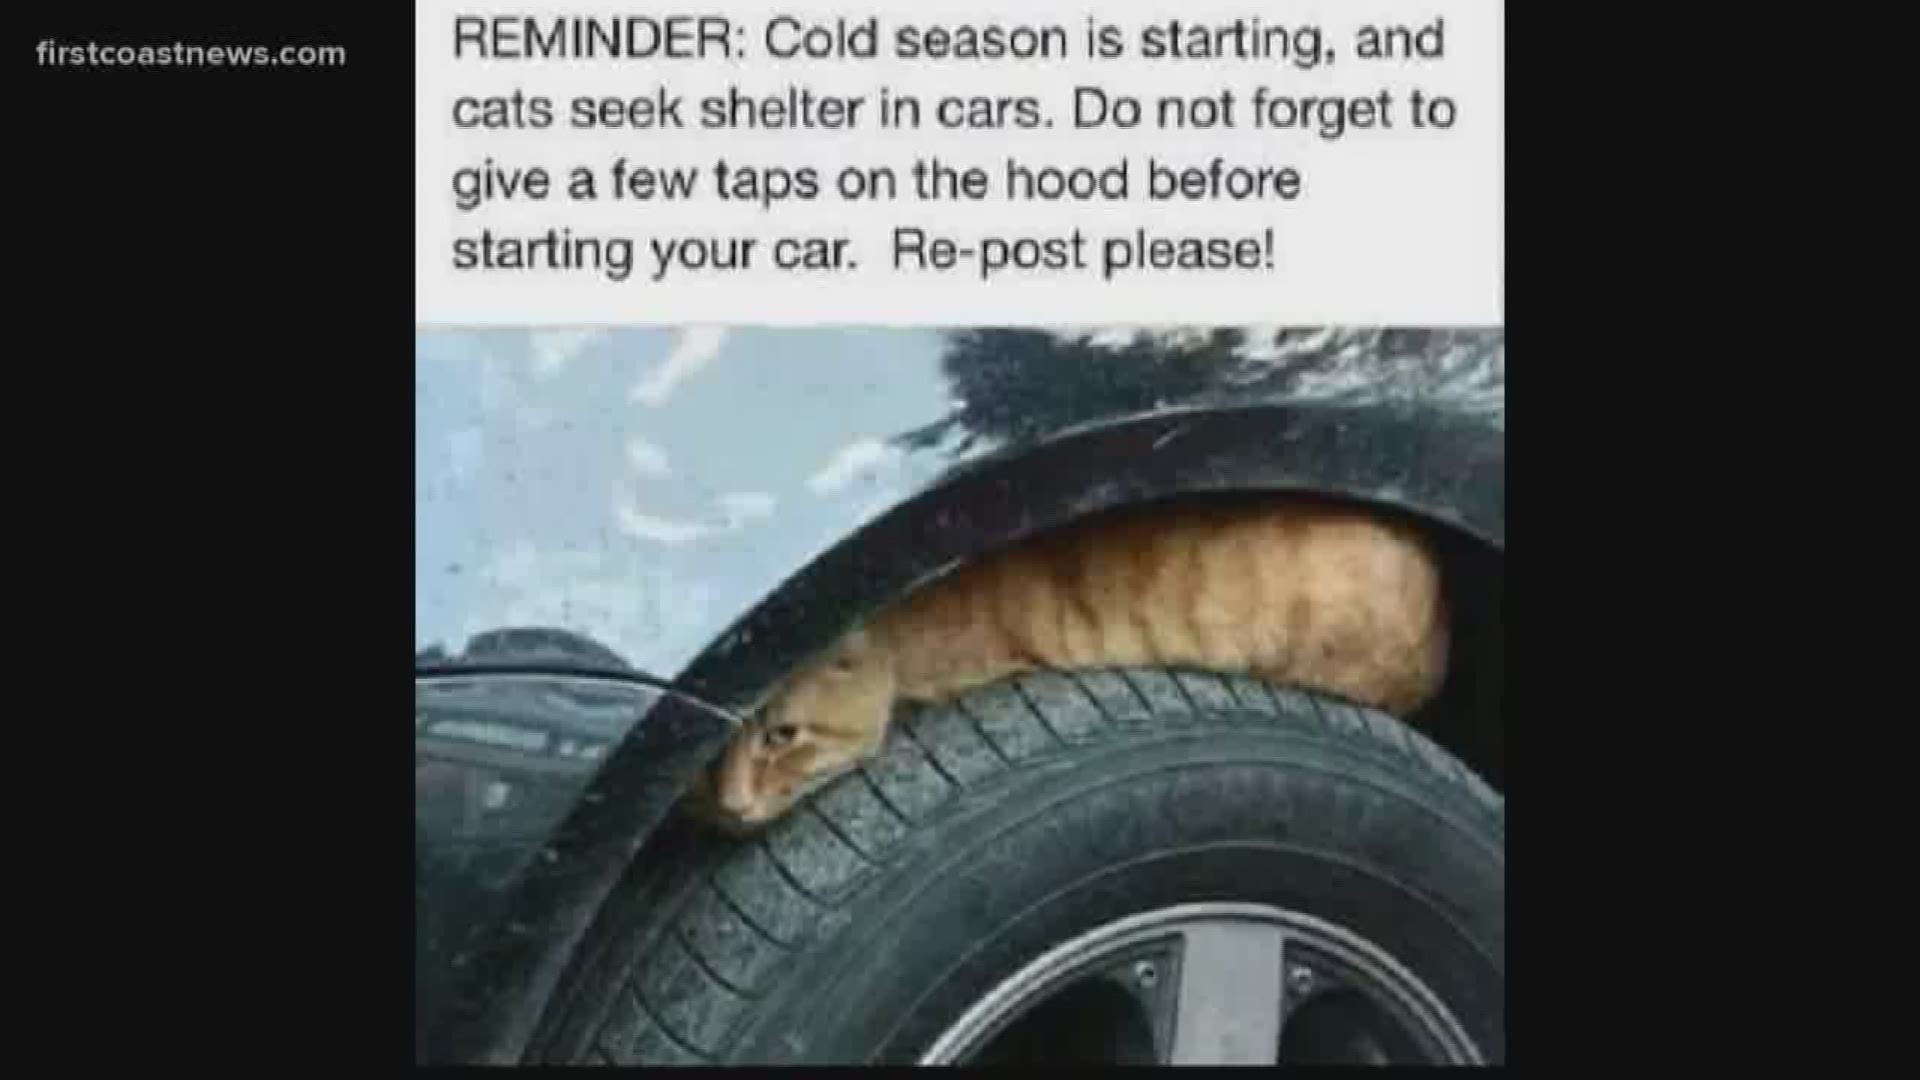 This time of year, cats hang out on top of tires and engines to try and stay warm.